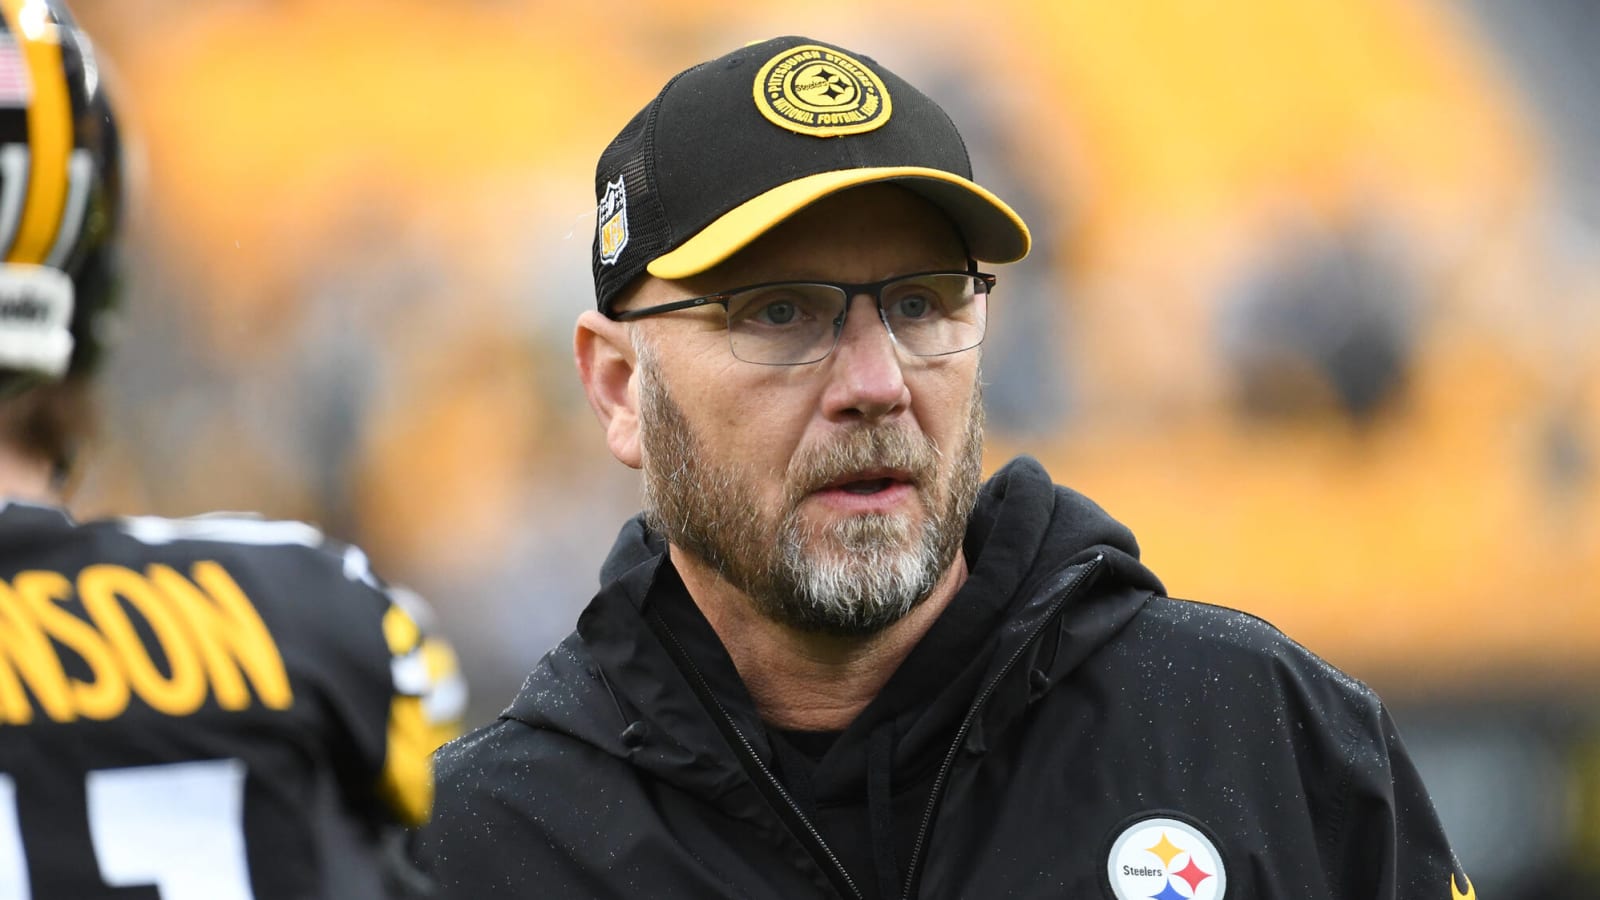 The Steelers Offense is Having Historically Bad Starts